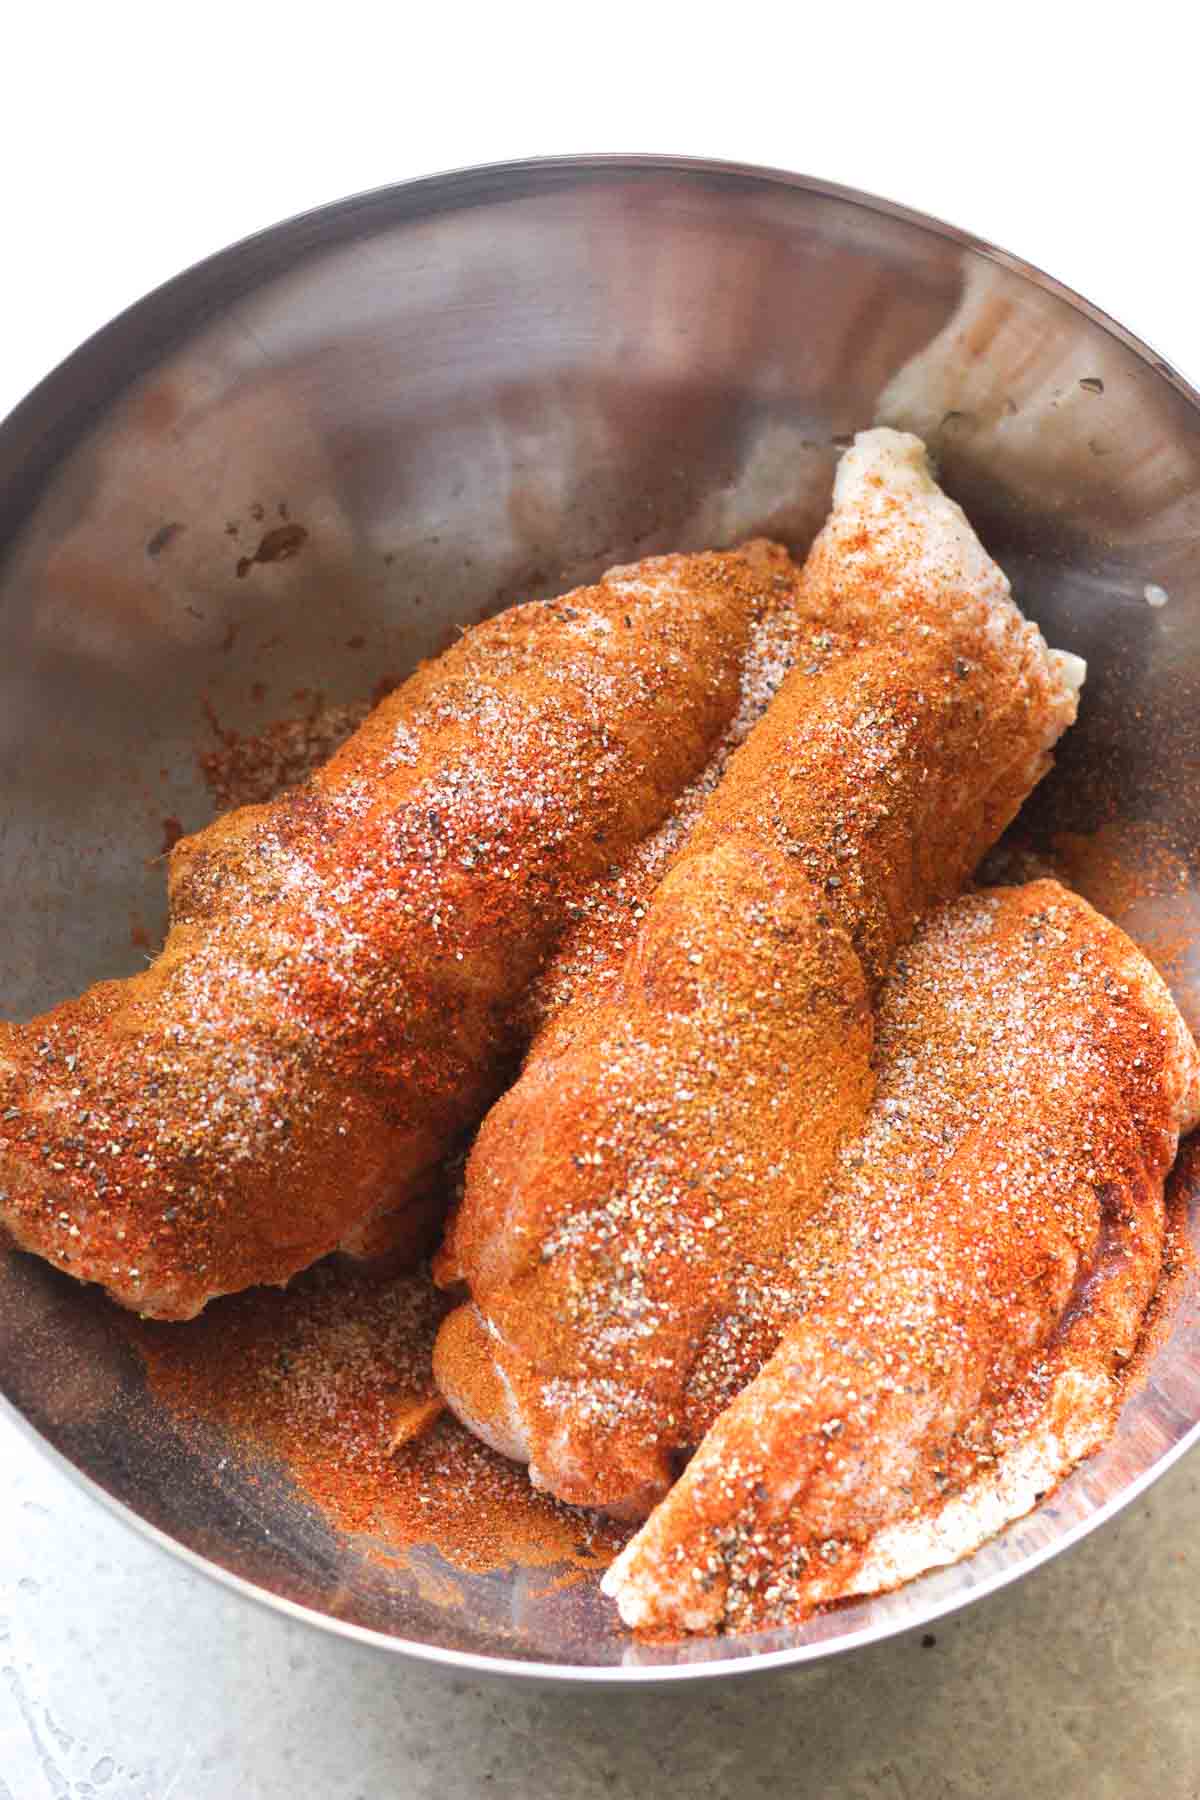 raw seasoned poultry in the large bowl